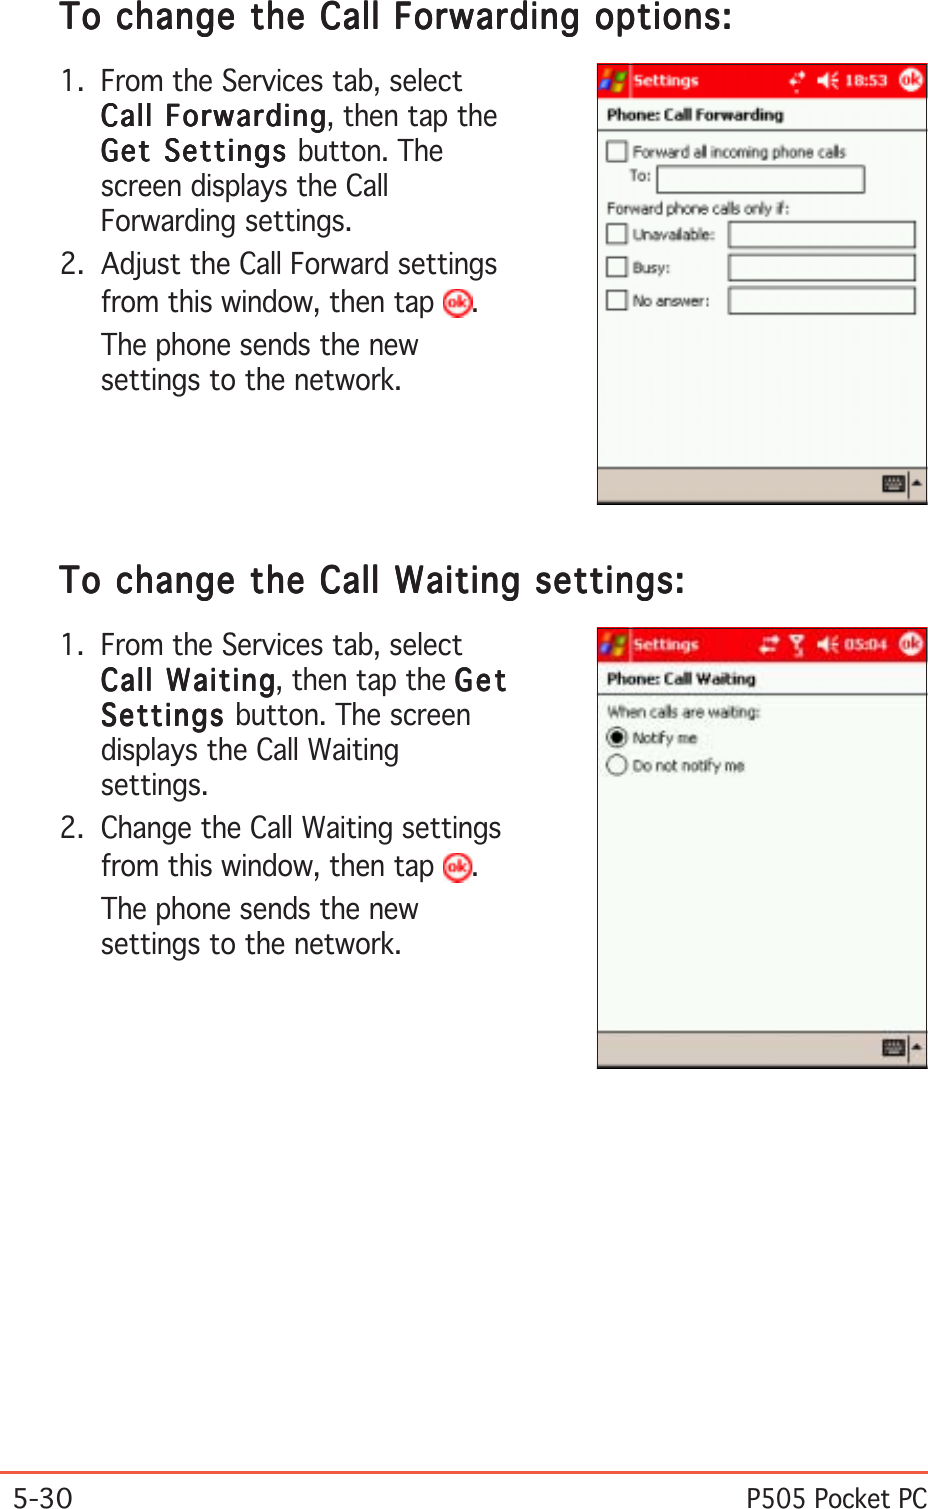 5-30P505 Pocket PCTo change the Call Forwarding options:To change the Call Forwarding options:To change the Call Forwarding options:To change the Call Forwarding options:To change the Call Forwarding options:1. From the Services tab, selectCall ForwardingCall ForwardingCall ForwardingCall ForwardingCall Forwarding, then tap theGet Settings Get Settings Get Settings Get Settings Get Settings button. Thescreen displays the CallForwarding settings.2. Adjust the Call Forward settingsfrom this window, then tap  .The phone sends the newsettings to the network.To change the Call Waiting settings:To change the Call Waiting settings:To change the Call Waiting settings:To change the Call Waiting settings:To change the Call Waiting settings:1. From the Services tab, selectCall WaitingCall WaitingCall WaitingCall WaitingCall Waiting, then tap the GetGetGetGetGetSettingsSettingsSettingsSettingsSettings button. The screendisplays the Call Waitingsettings.2. Change the Call Waiting settingsfrom this window, then tap  .The phone sends the newsettings to the network.